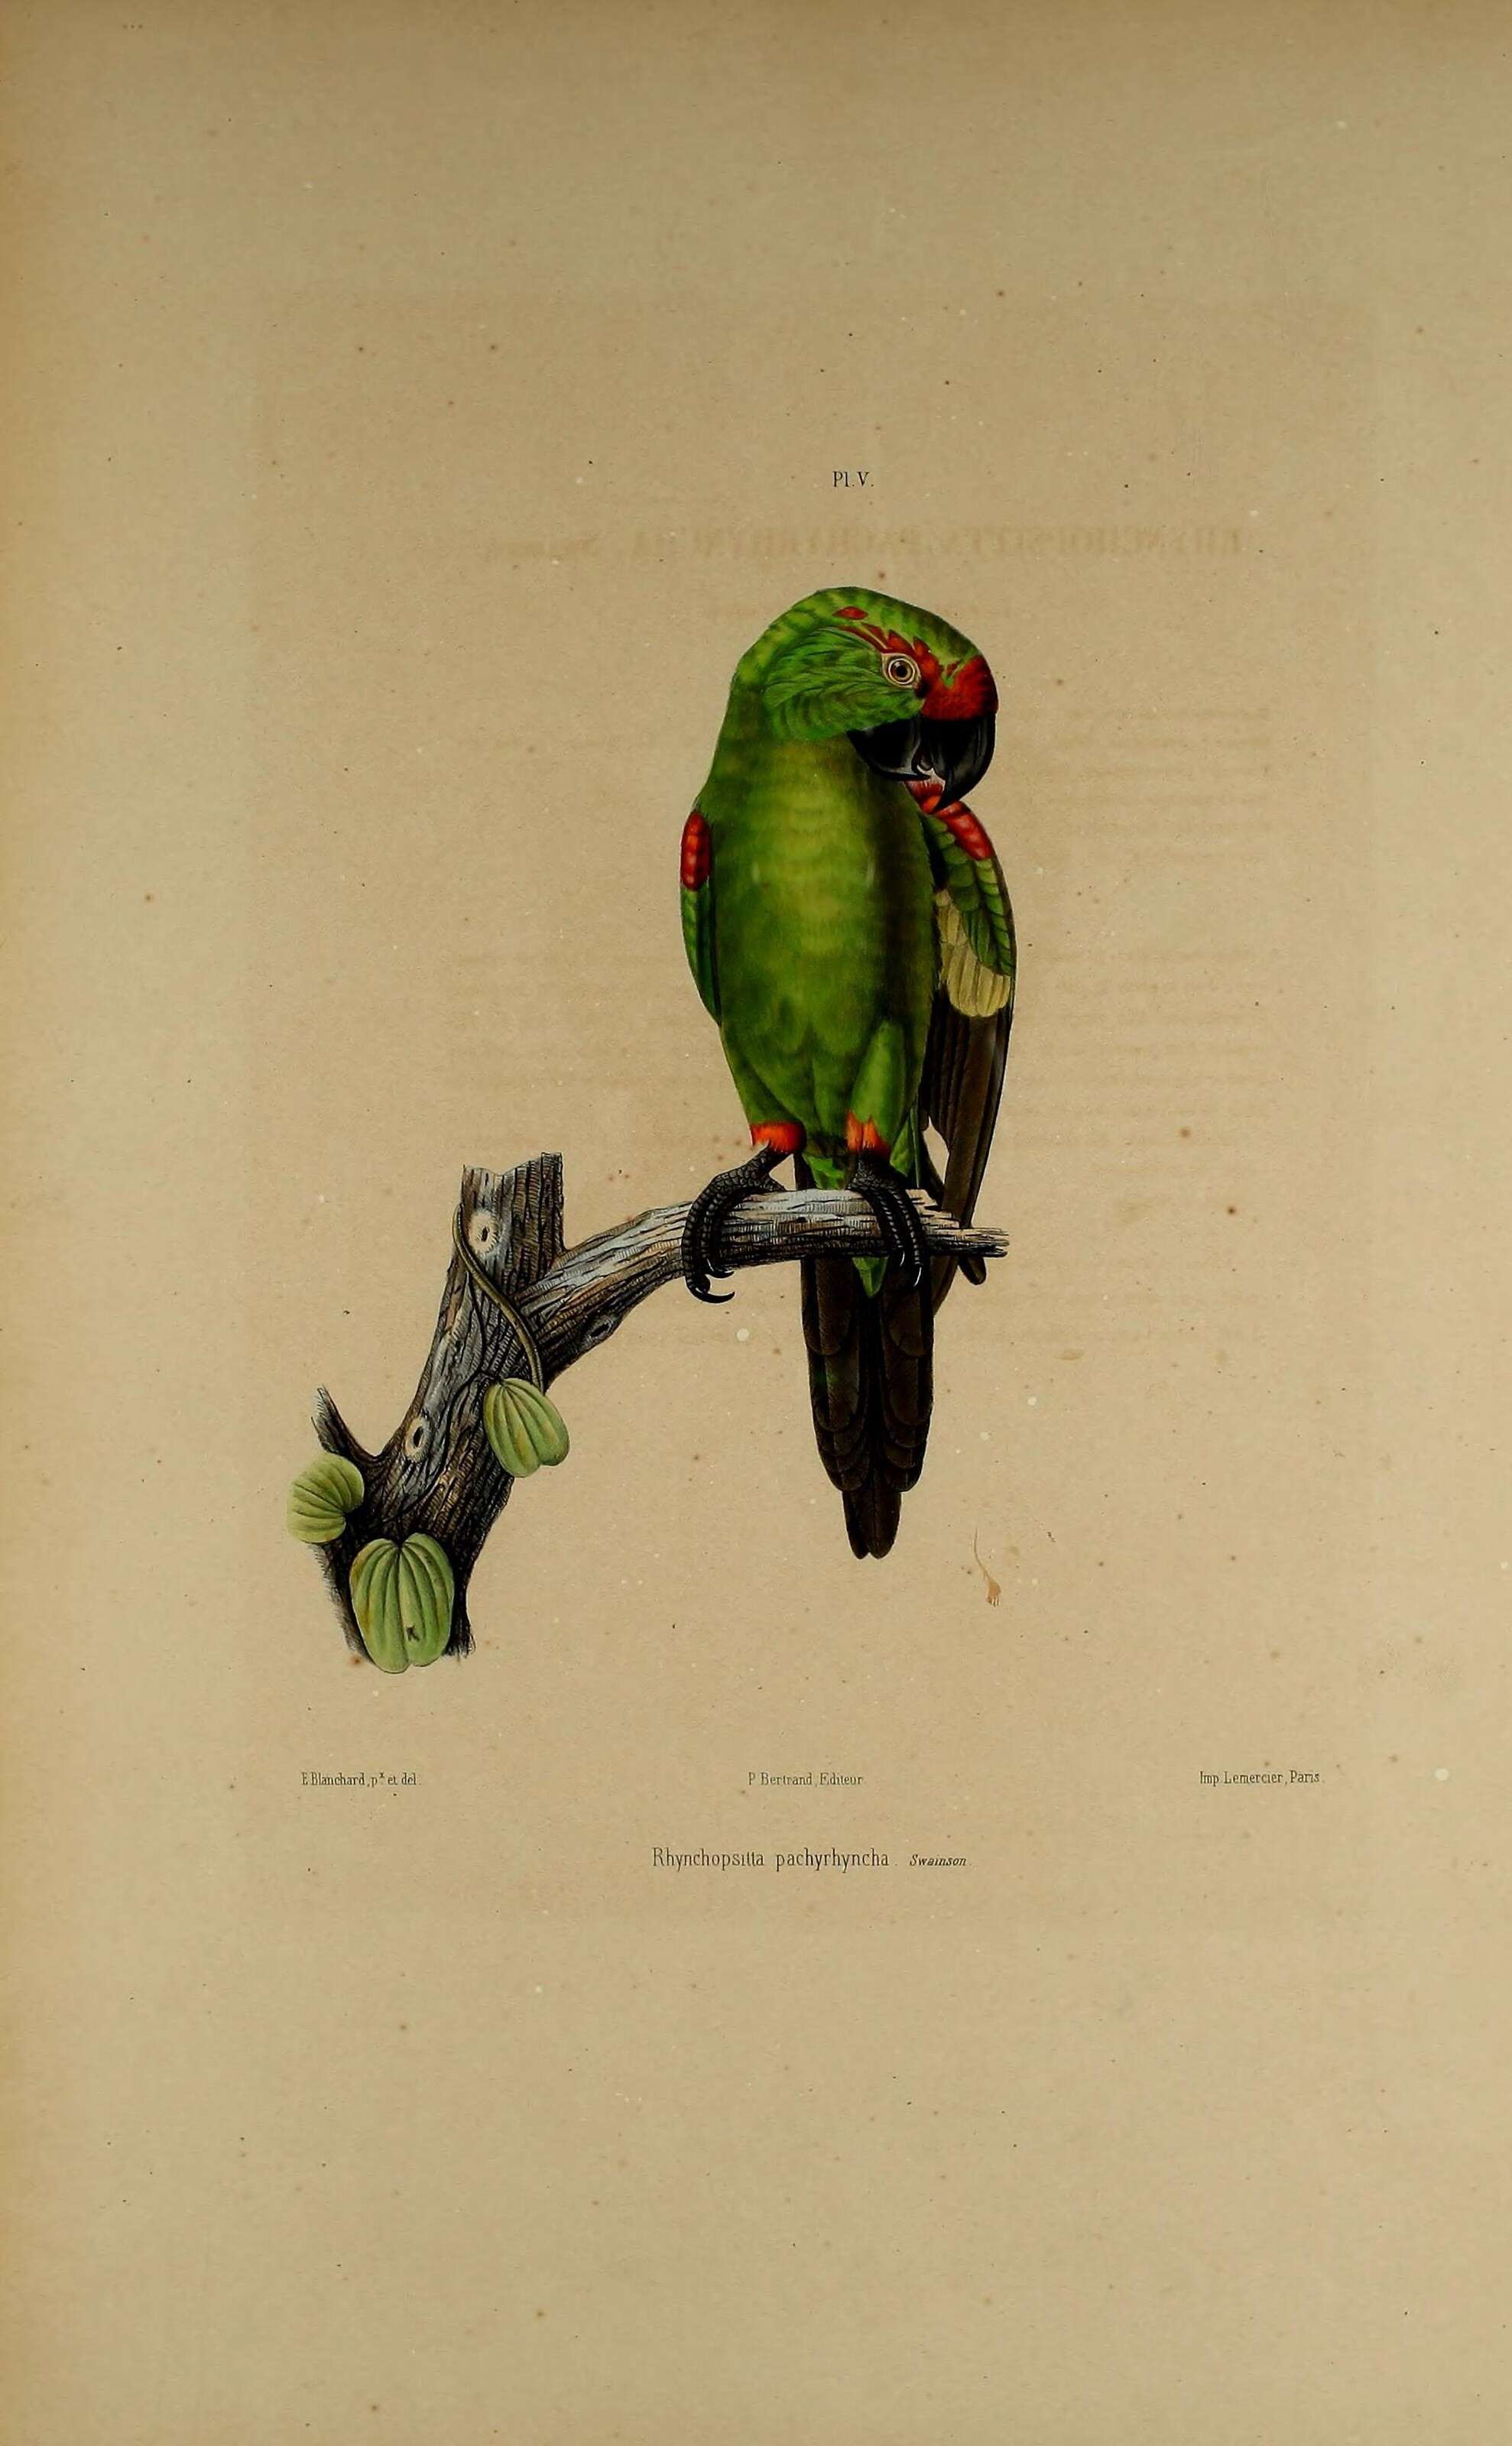 Image of Thick-billed parrot